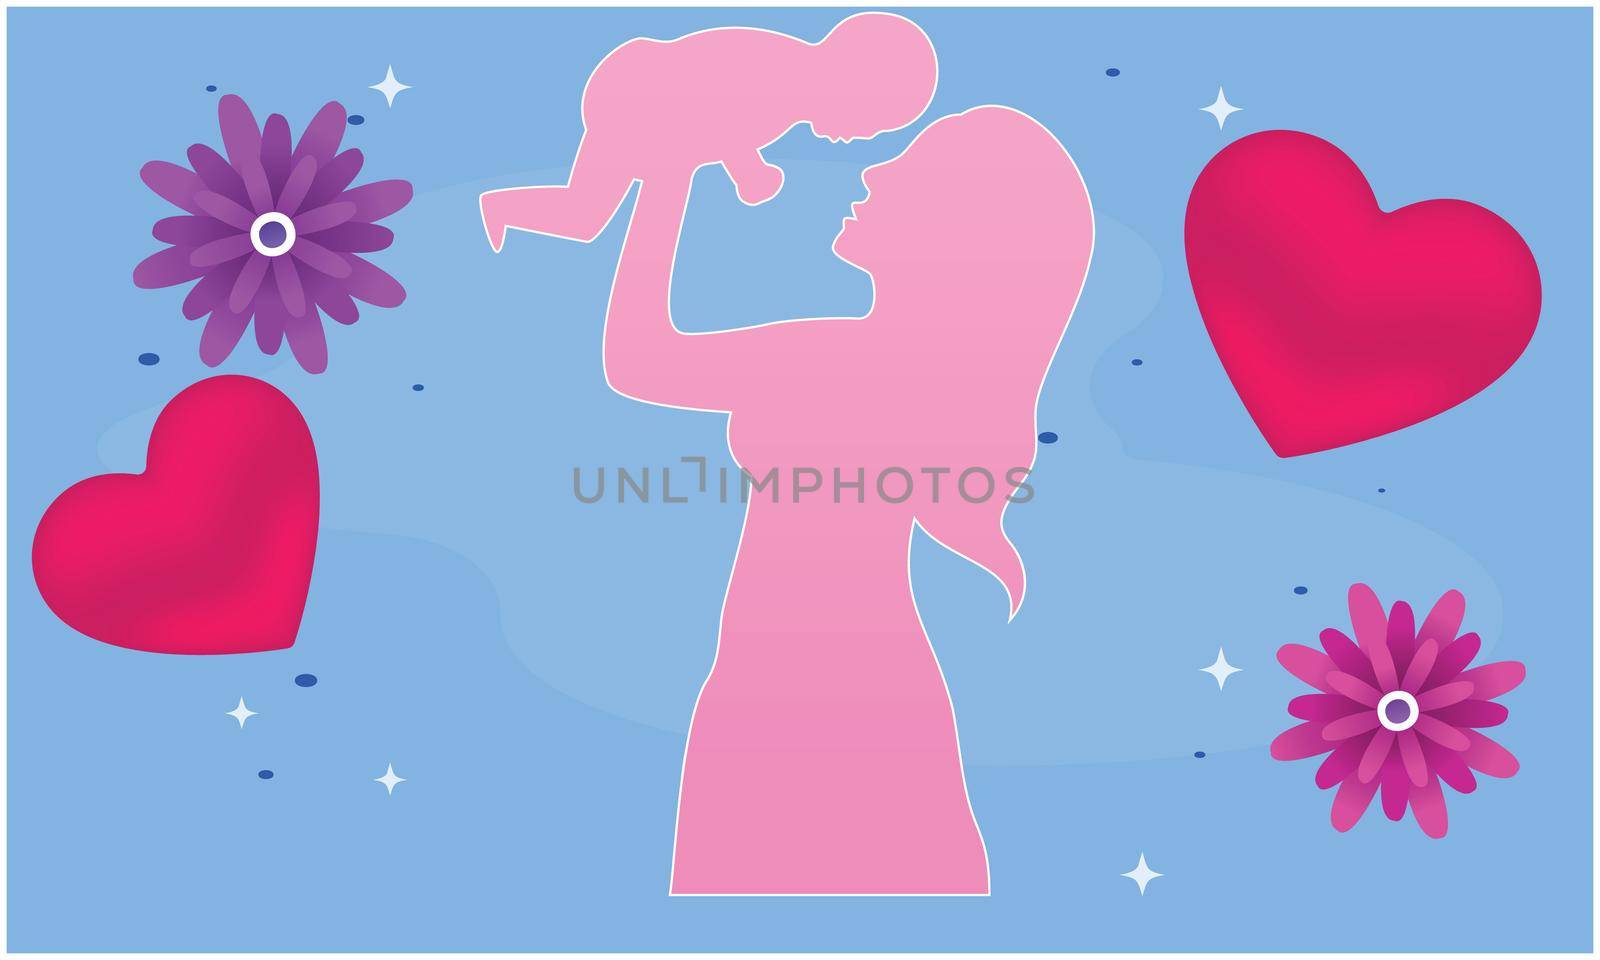 art of mother playing with her kid on heart shape background